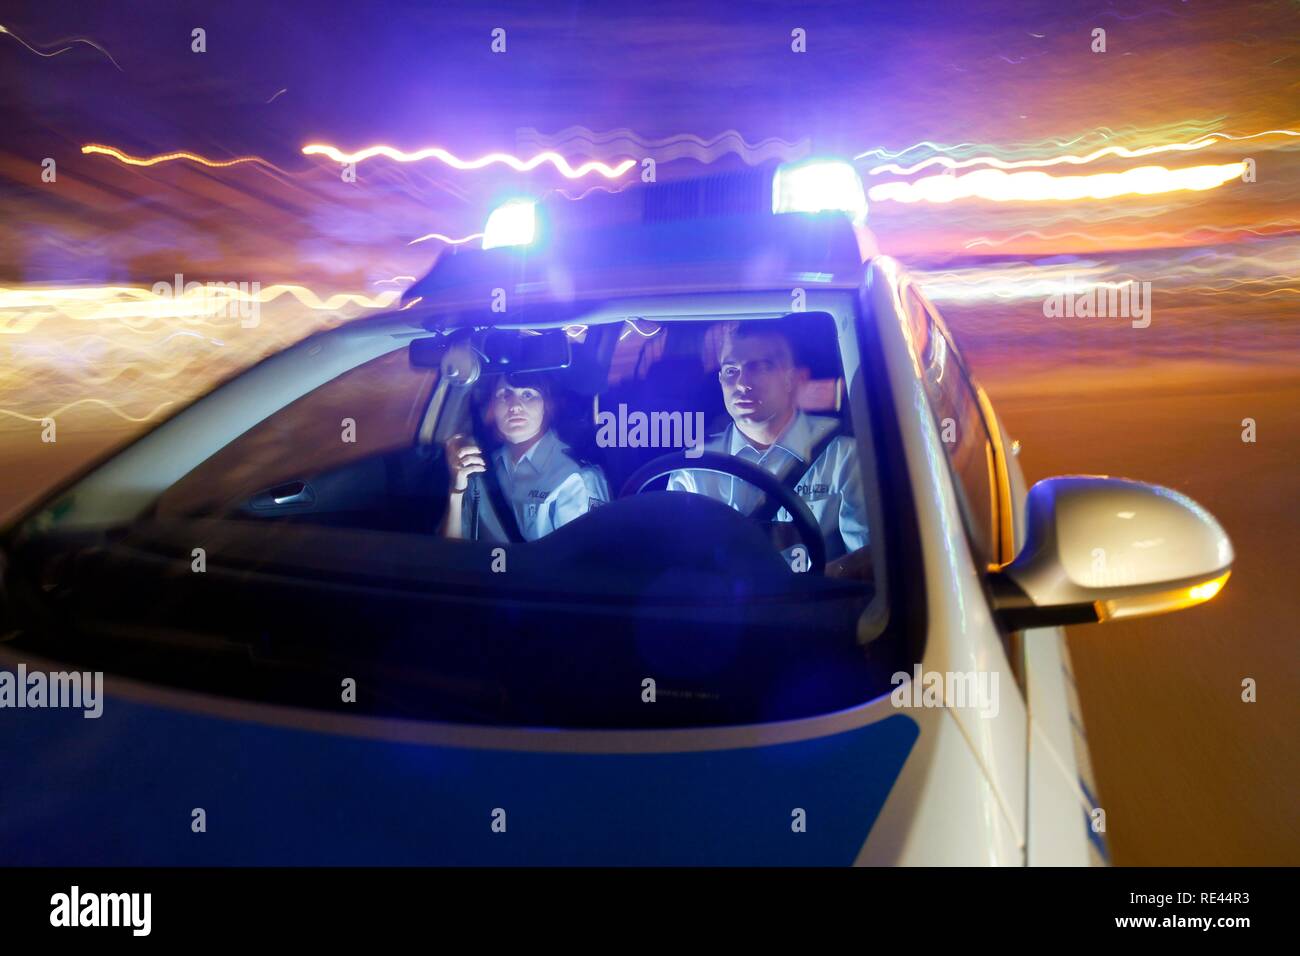 Police patrol car driving with flashing lights and sirens Stock Photo